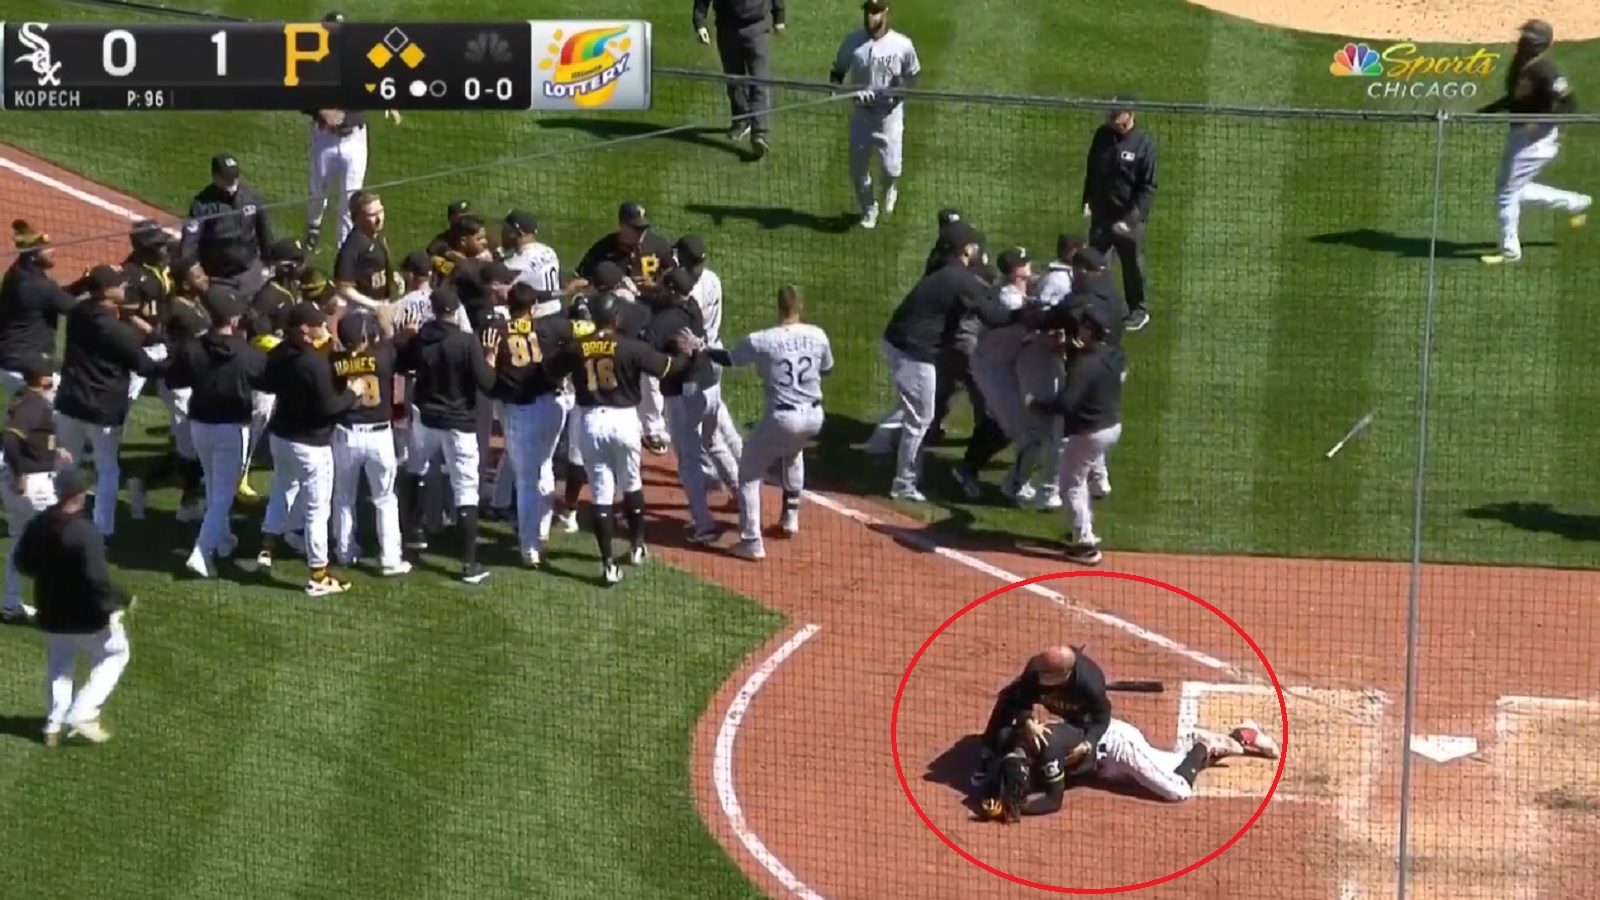 Oneil Cruz injury: Pirates shortstop fractures left ankle on slide